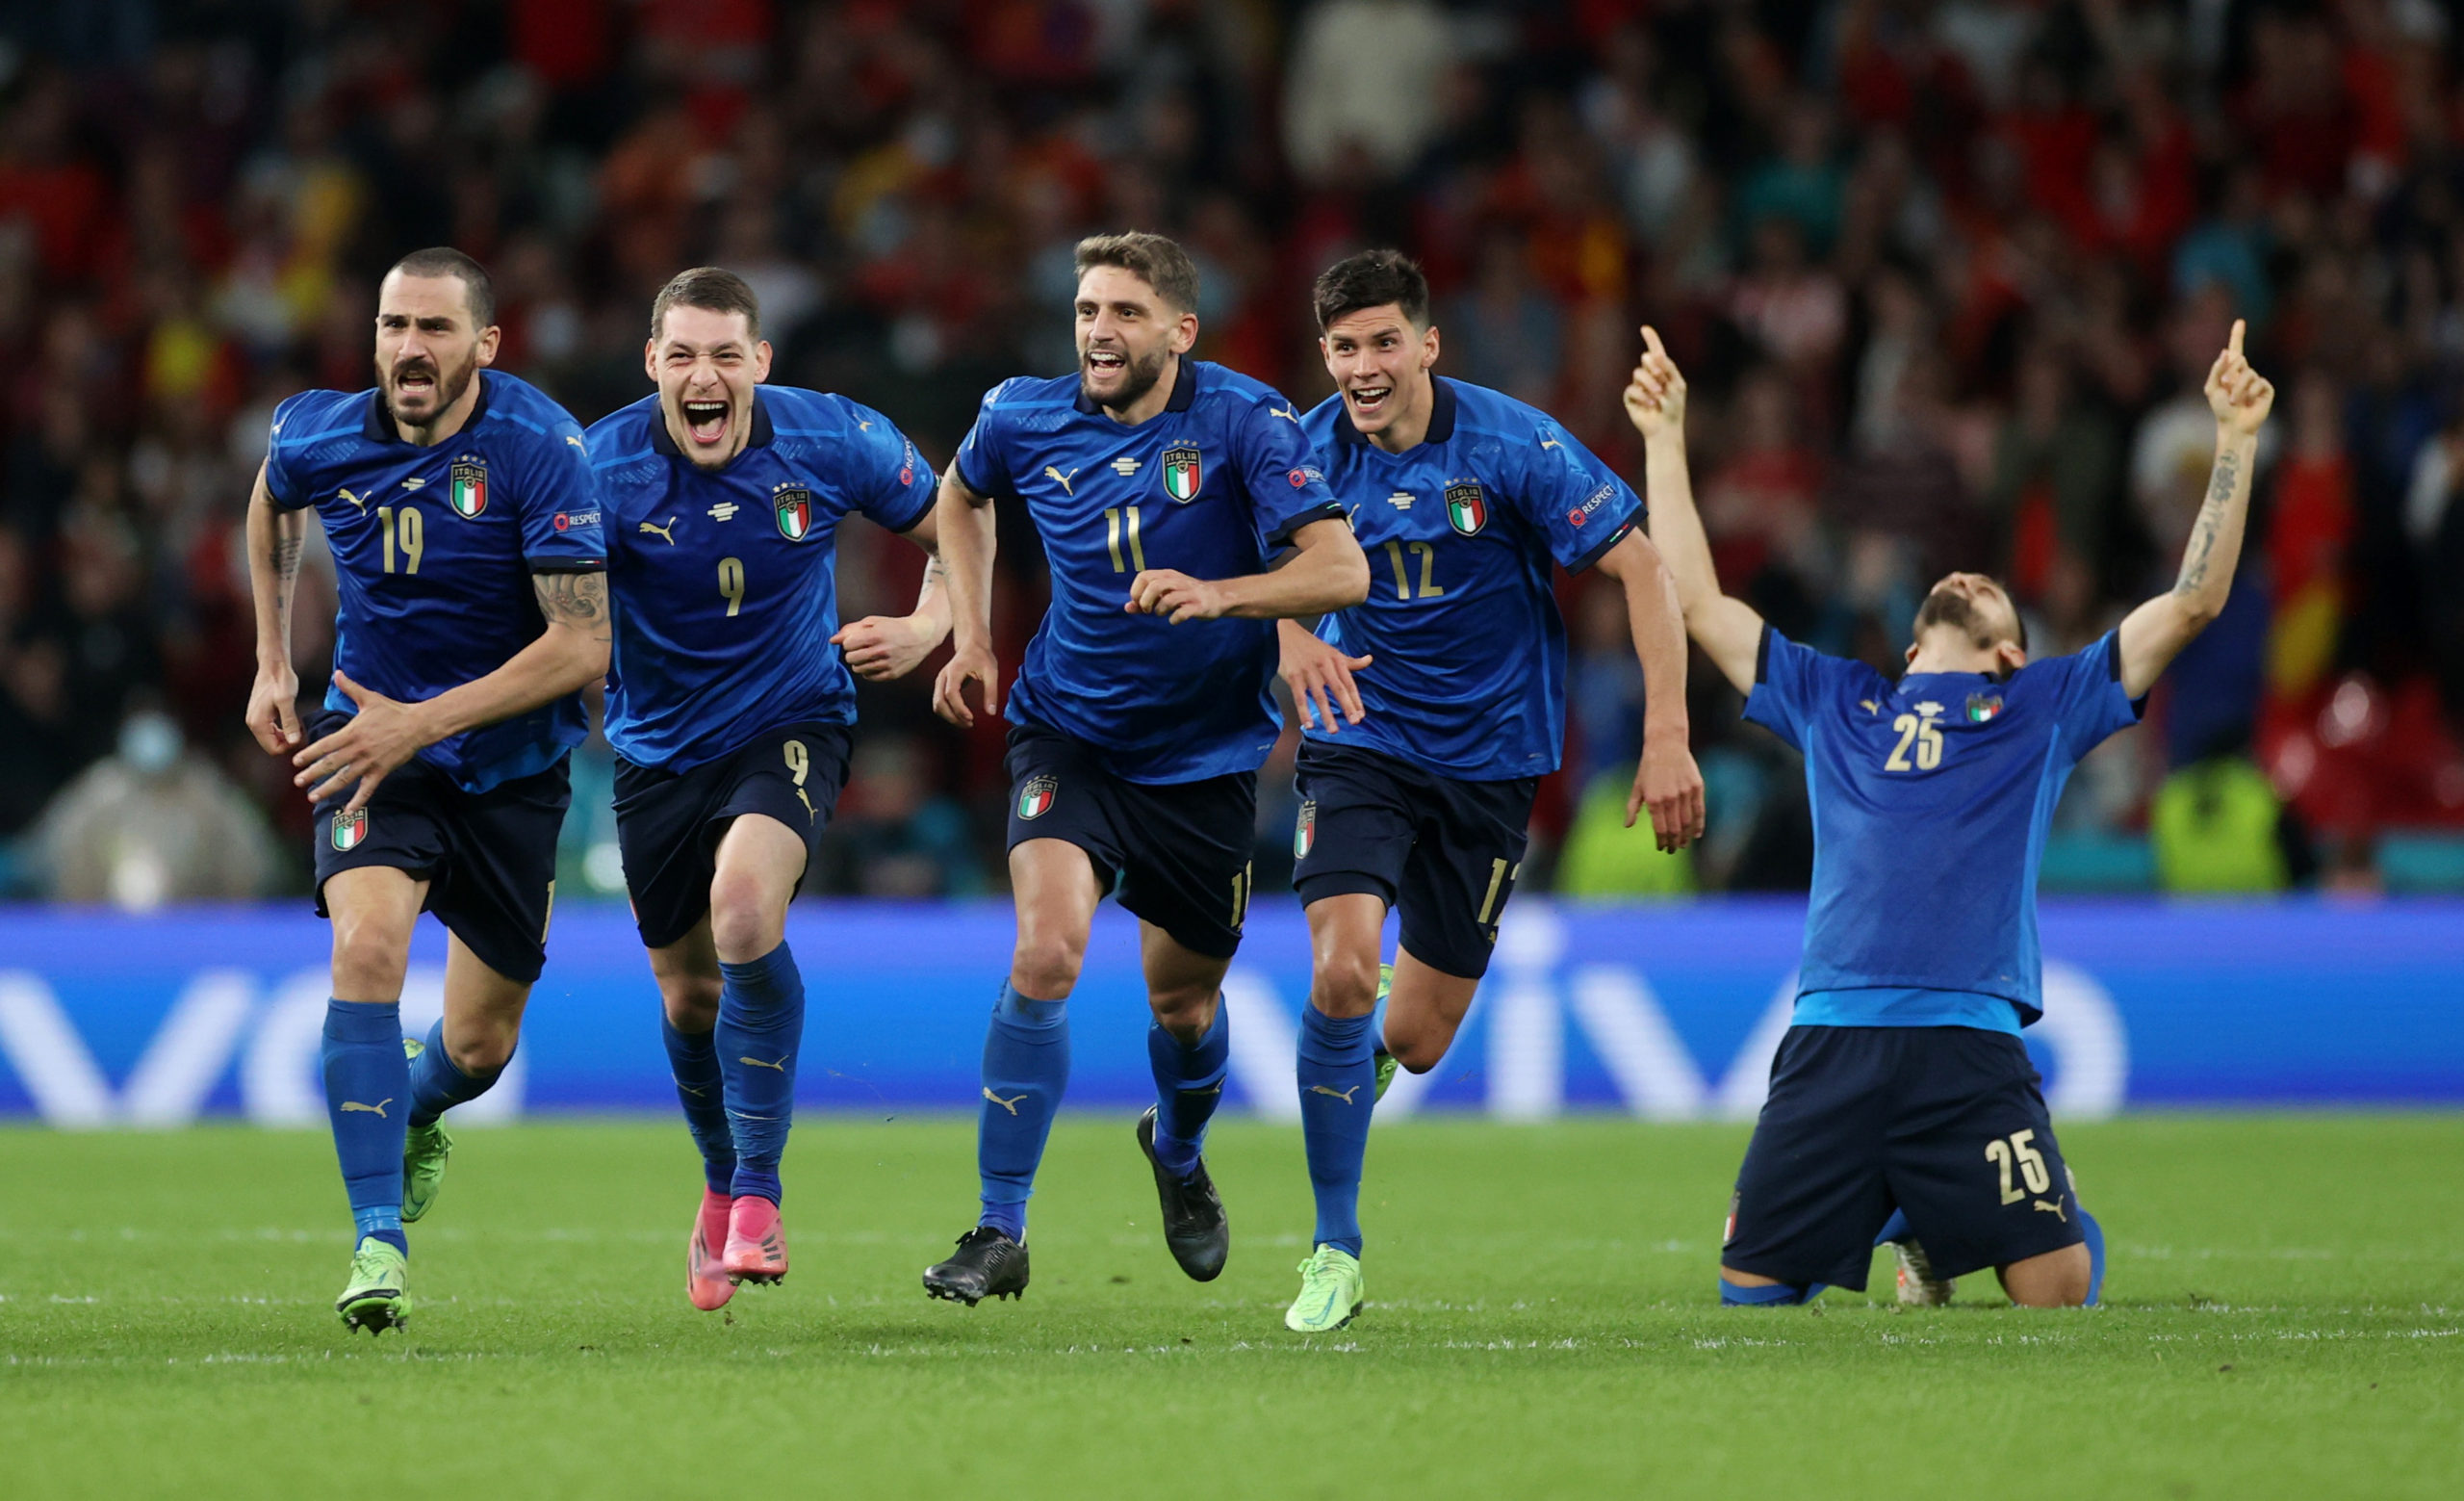 To find out the reasons behind the Italy success at Euro 2020, we delved deeper into the tactical nuances of their performances throughout the tournament